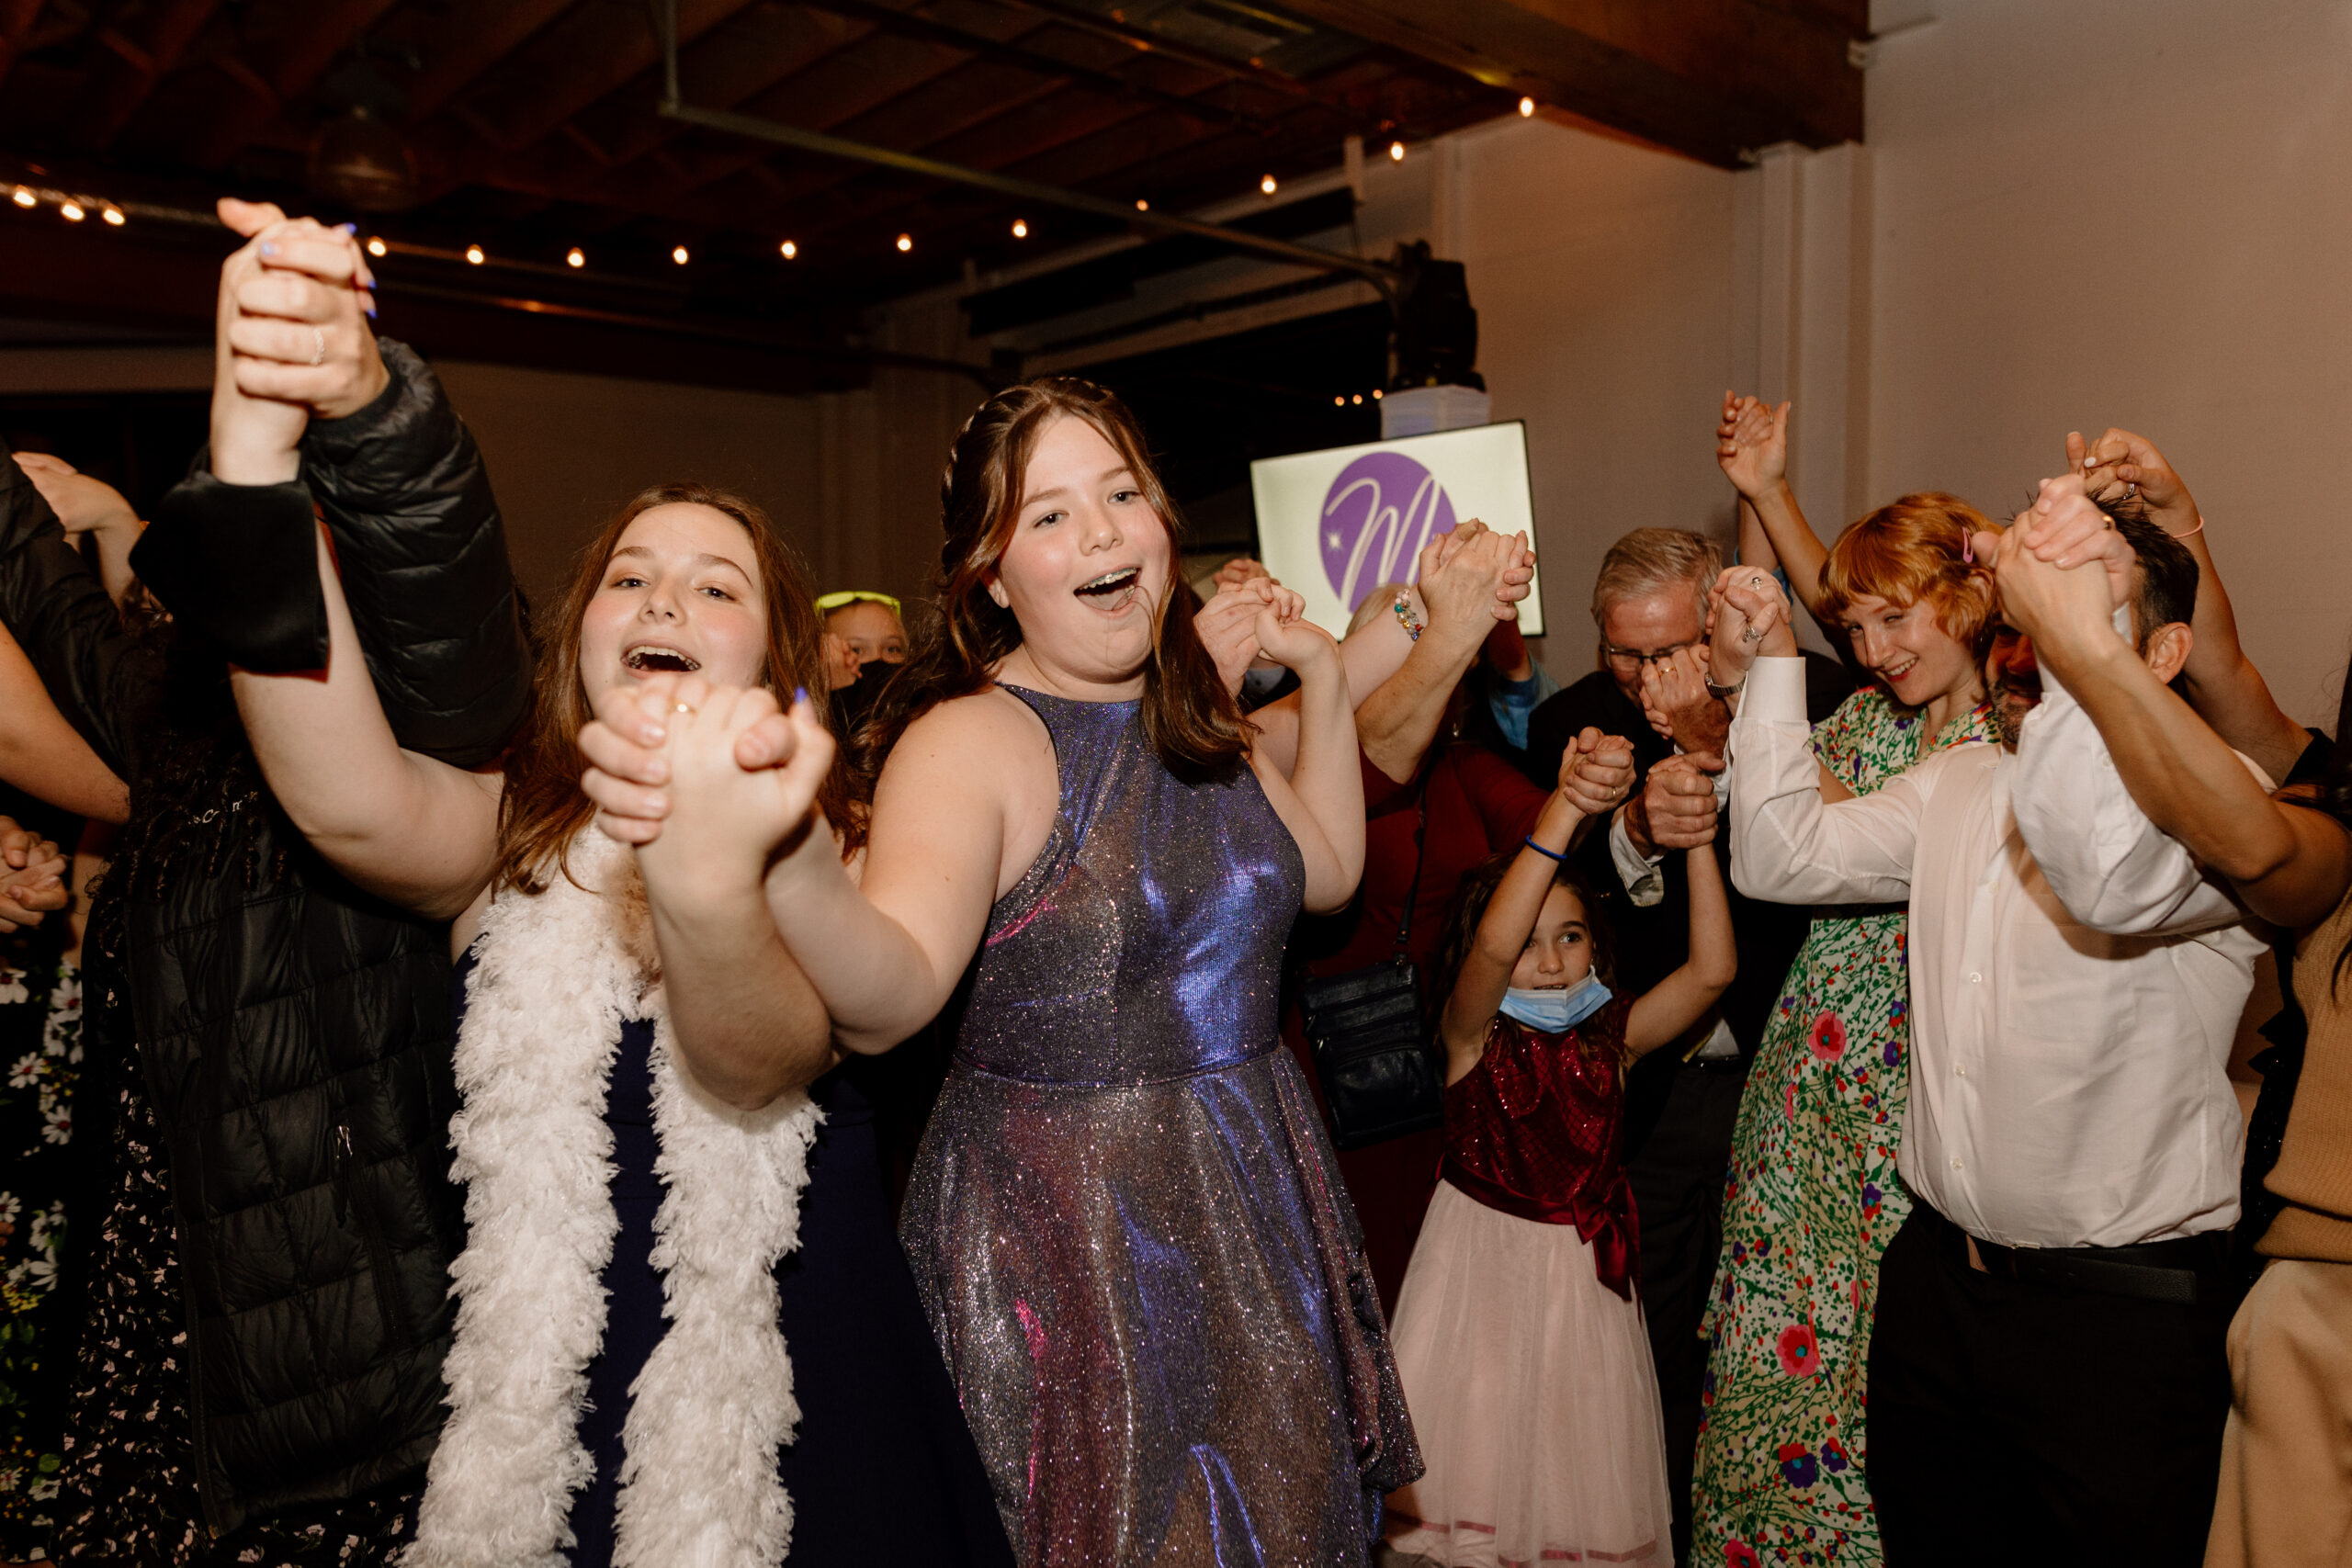 Children laughing and dancing after the hora at a bat mitzvah party at the Castaway in Portland.